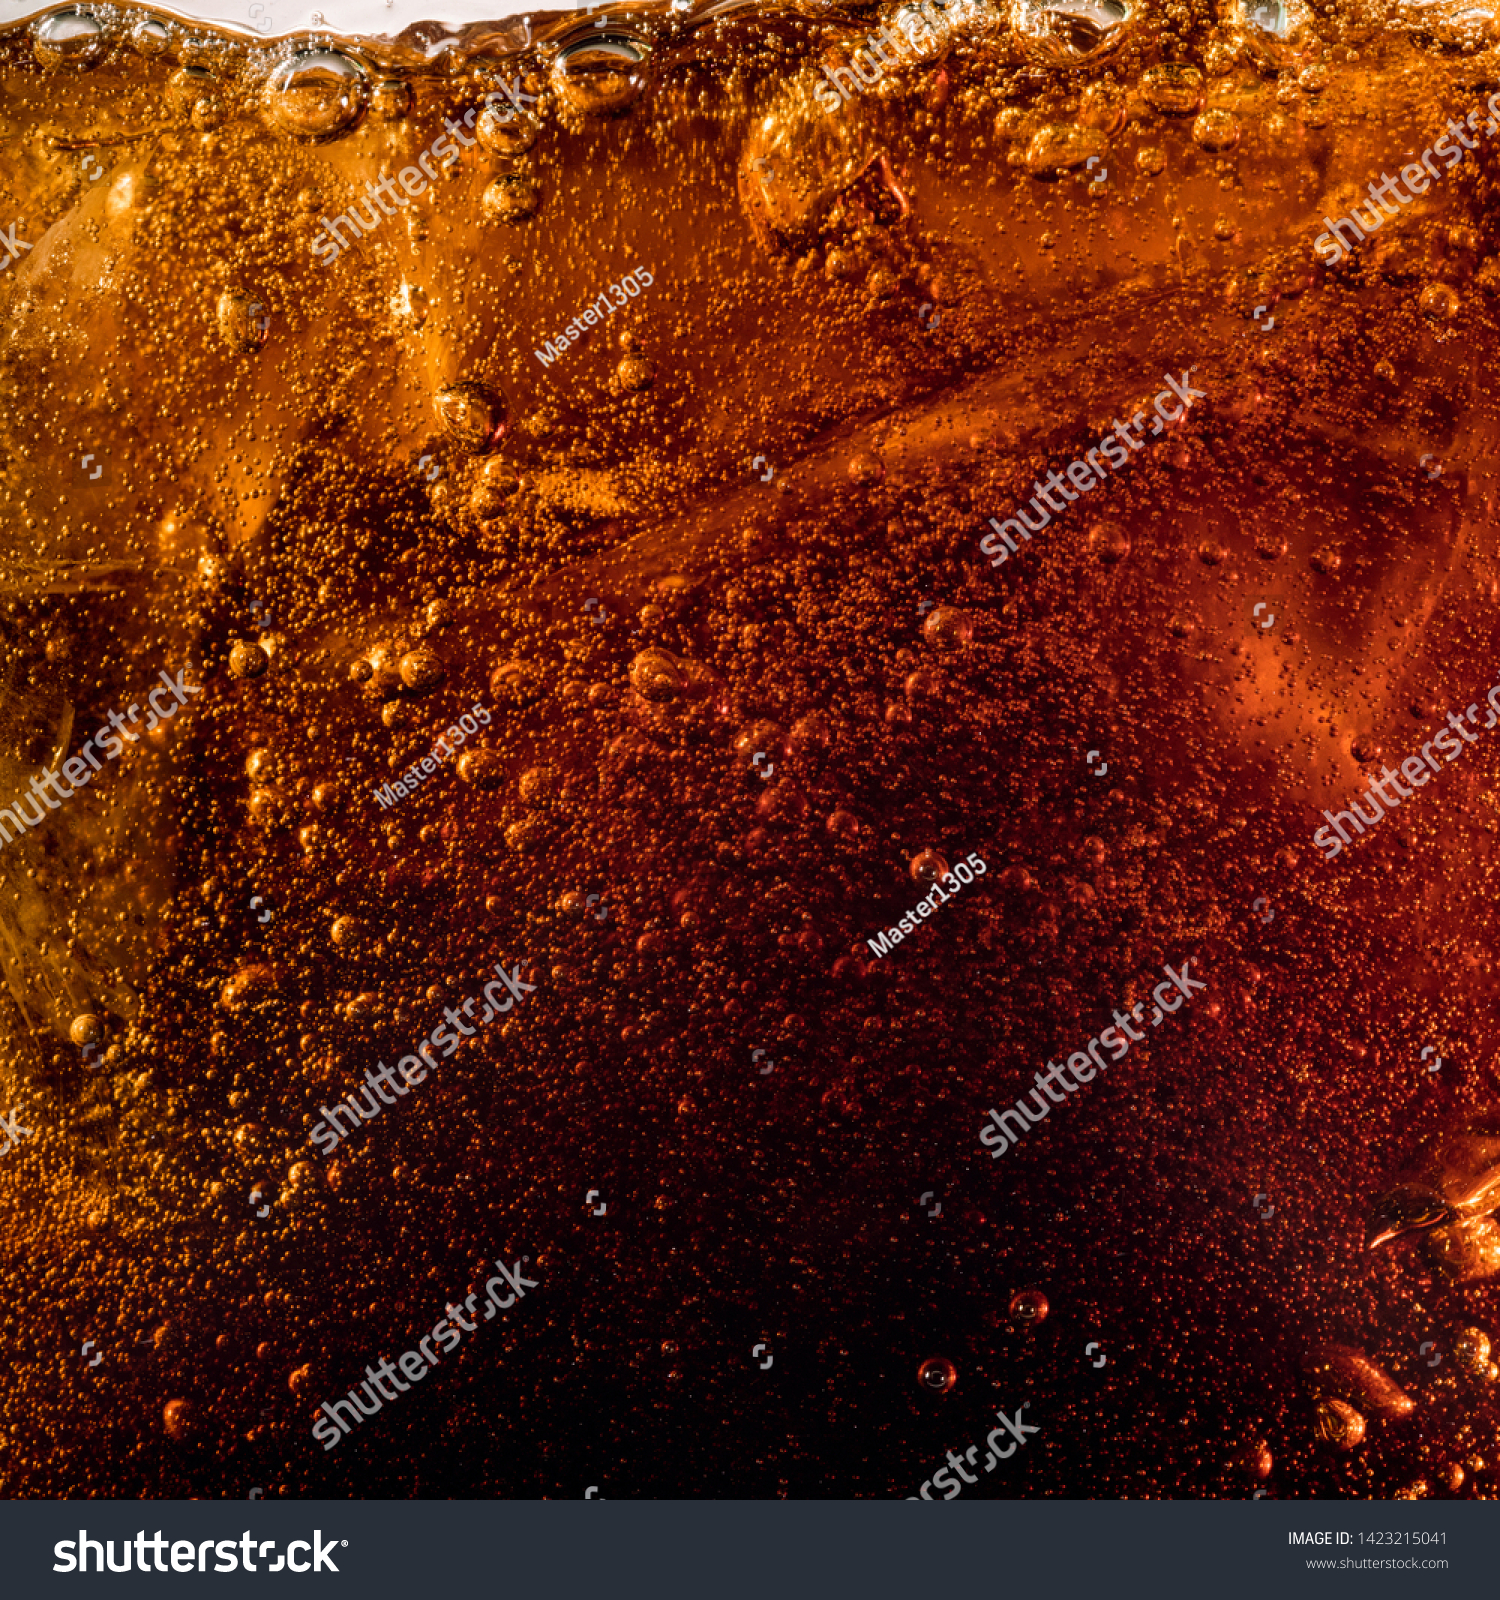 Close up view of the ice cubes in dark cola background. Texture of cooling sweet summer's drink with foam and macro bubbles on the glass wall. Fizzing or floating up to top of surface. #1423215041